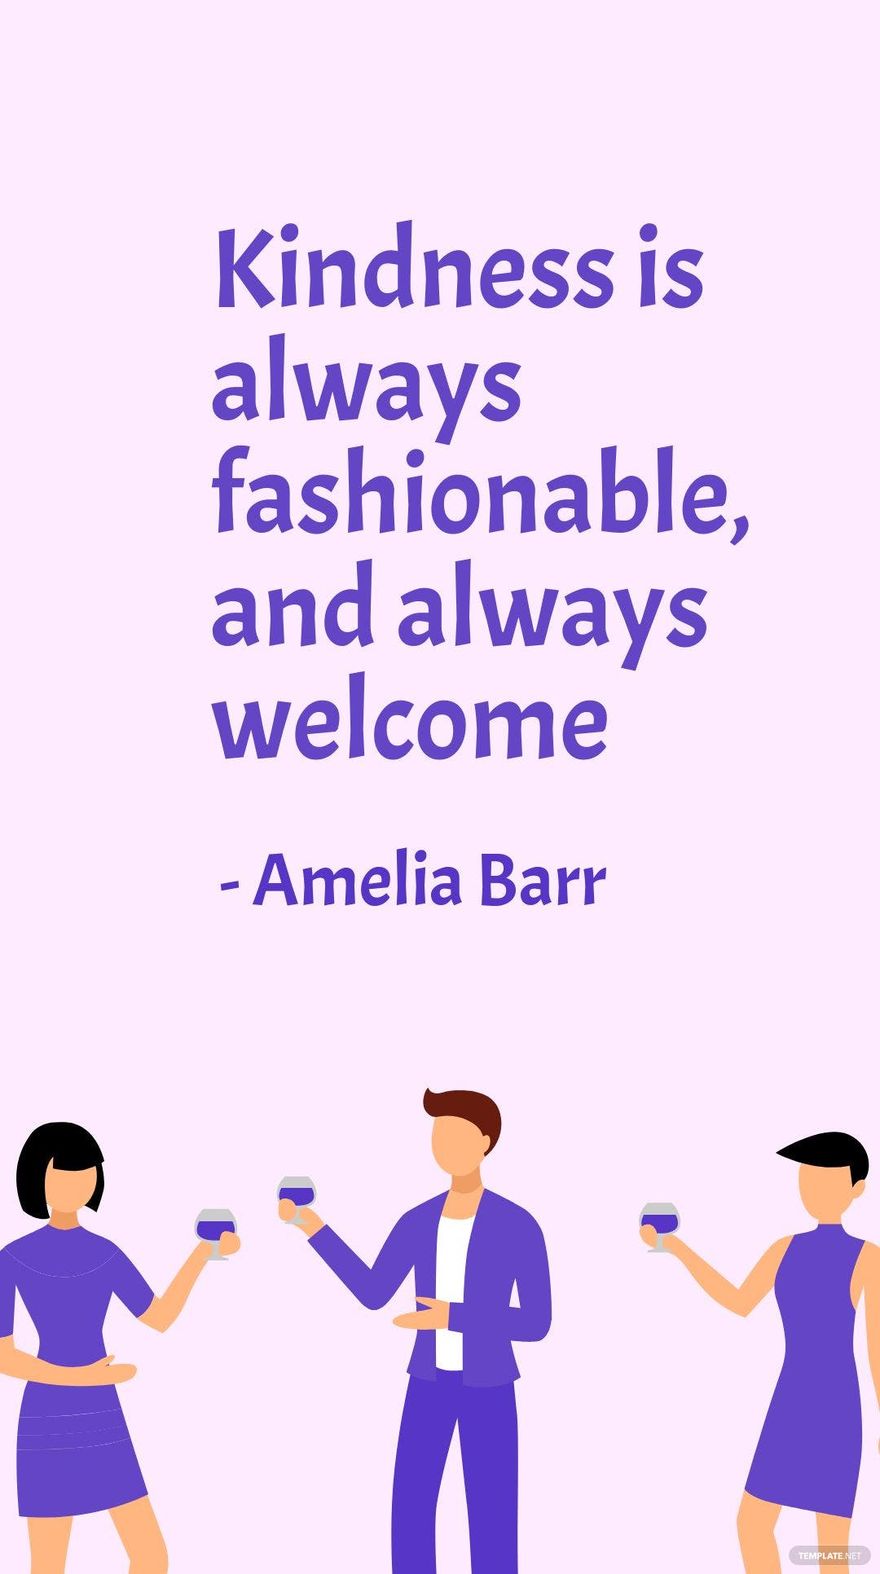 Amelia Barr - Kindness is always fashionable, and always welcome